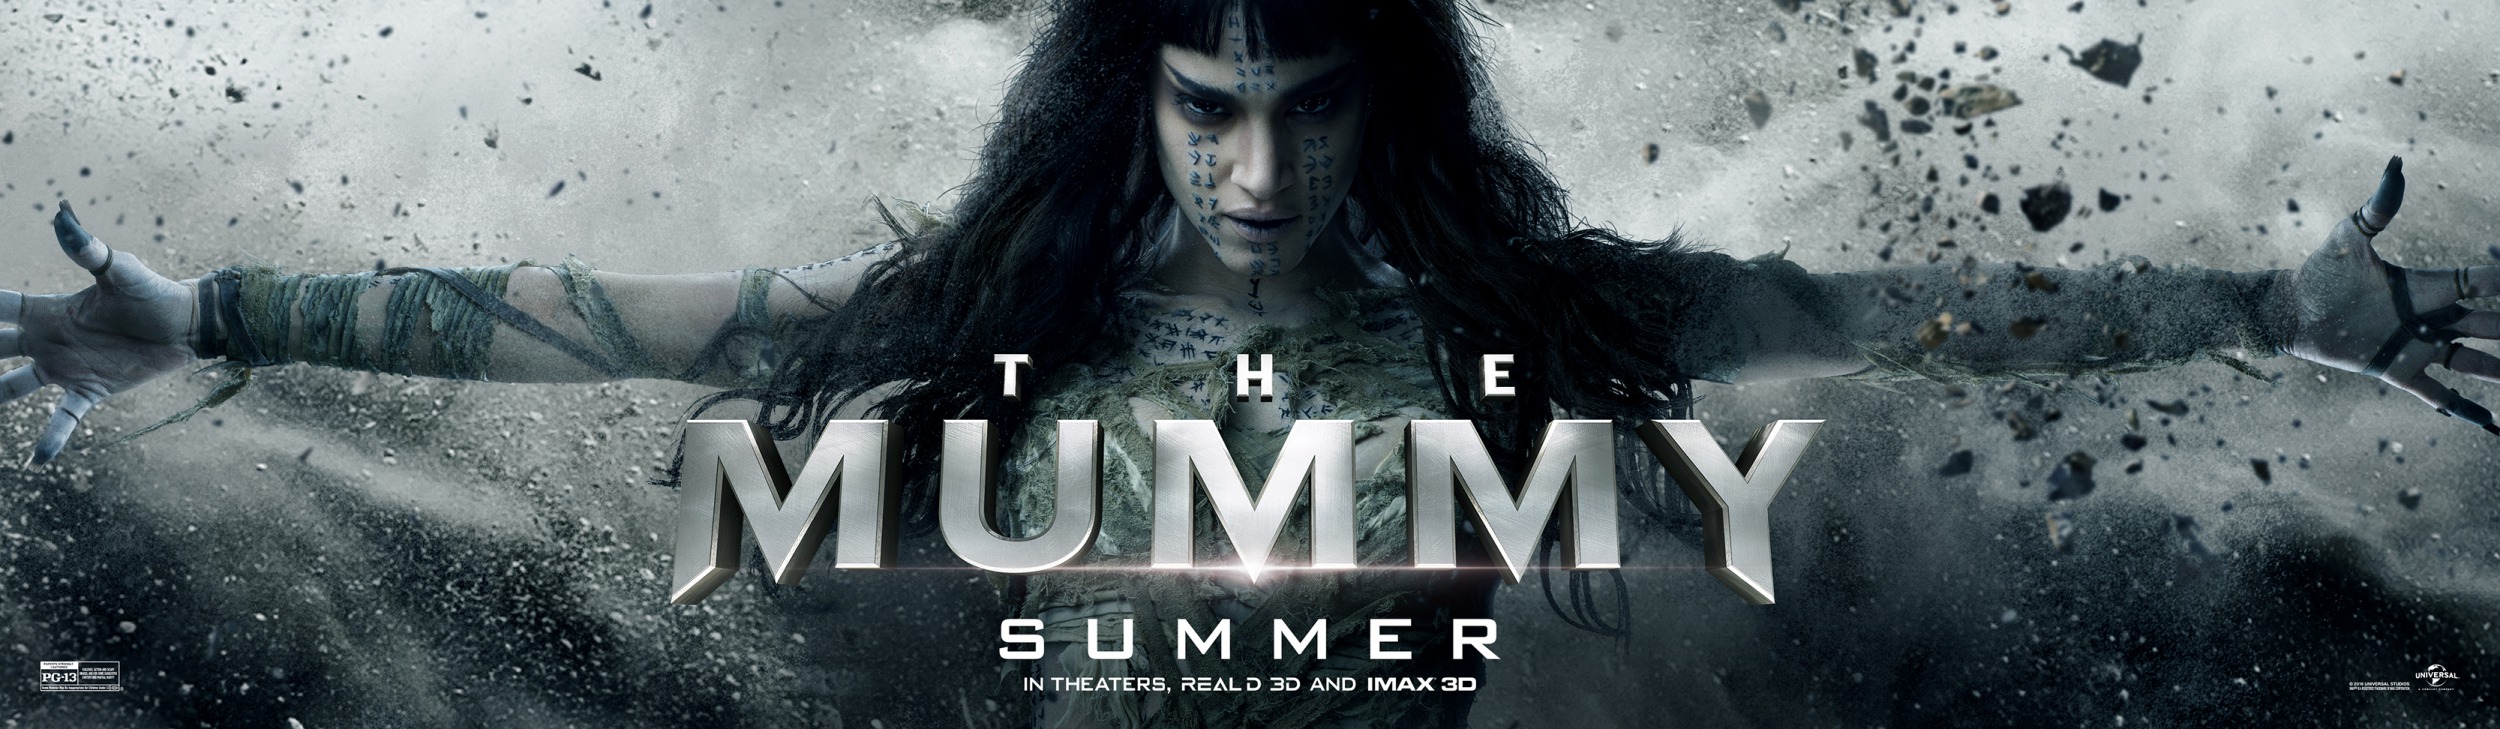 Mega Sized Movie Poster Image for The Mummy (#10 of 10)